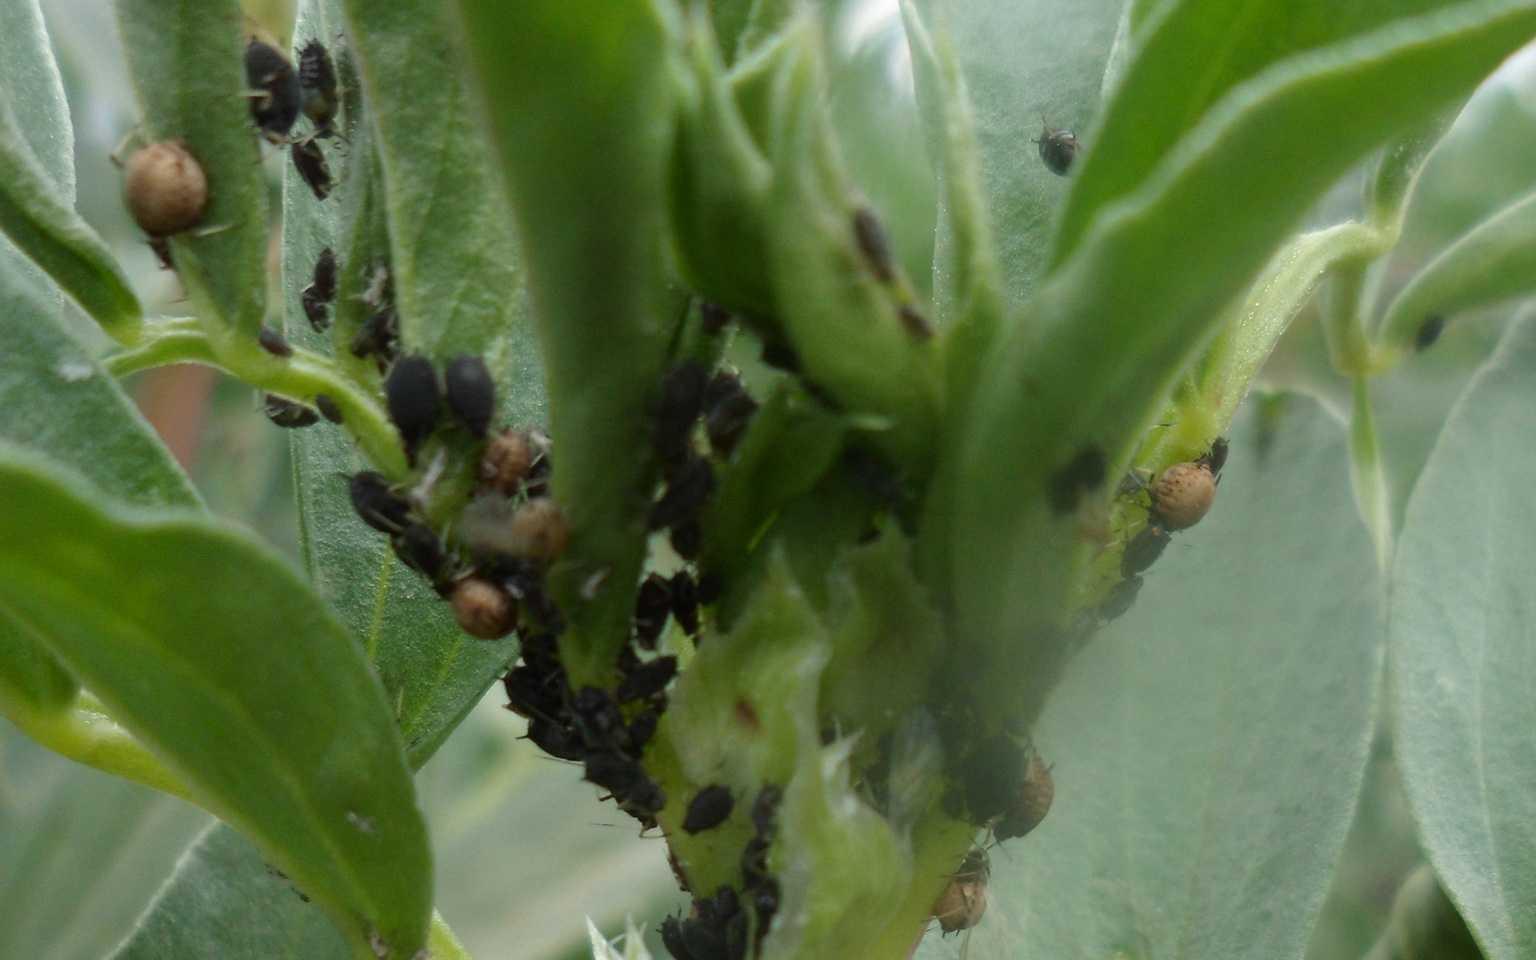 Bean aphid infestation